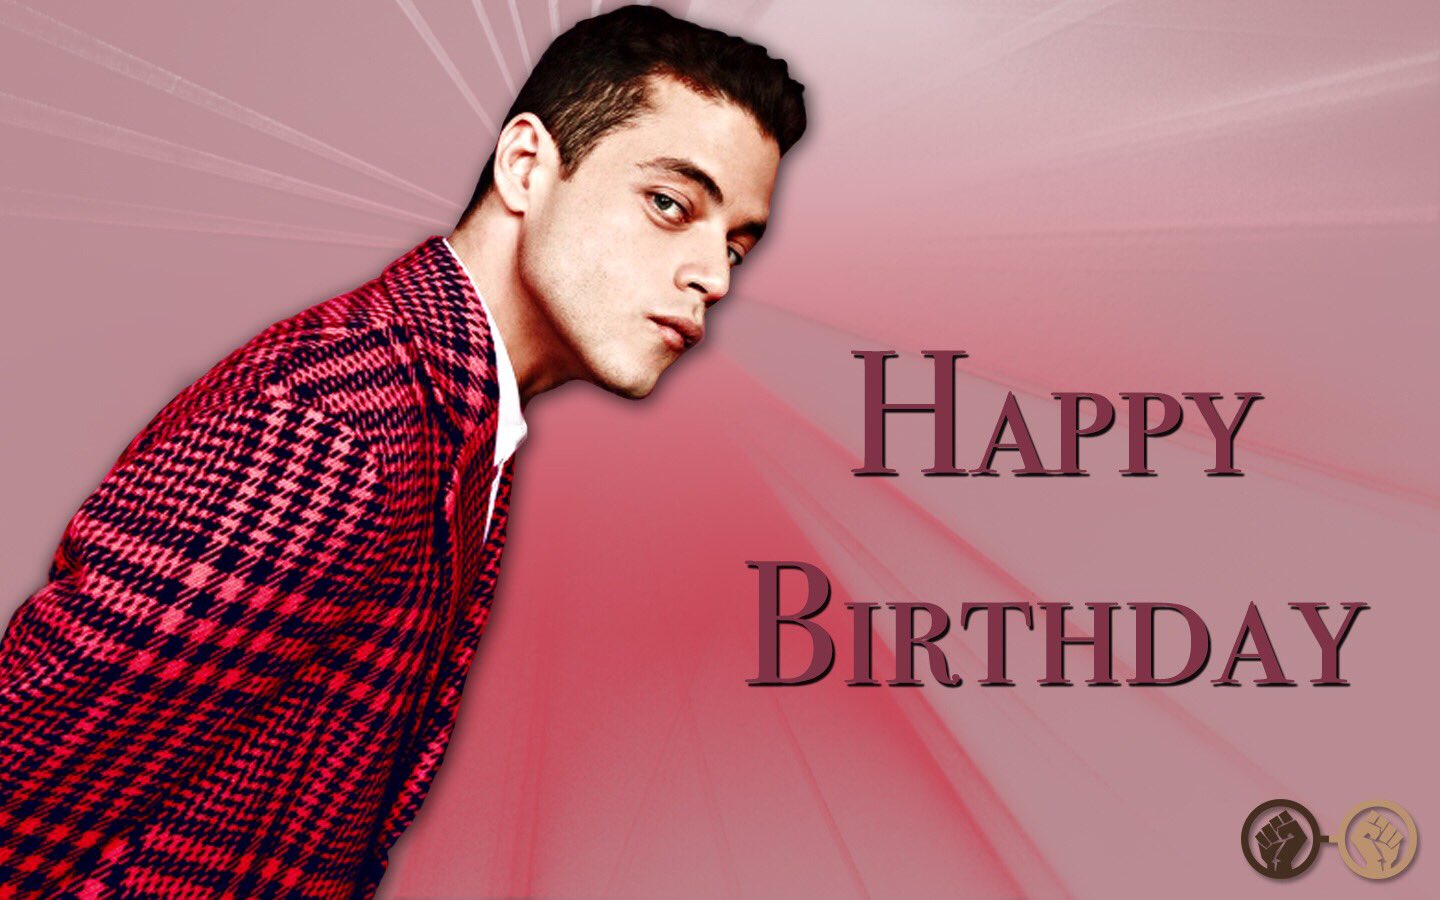 Wishing the incredibly talented Rami Malek a very happy birthday! The \Mr Robot\ star turns 37 today! 